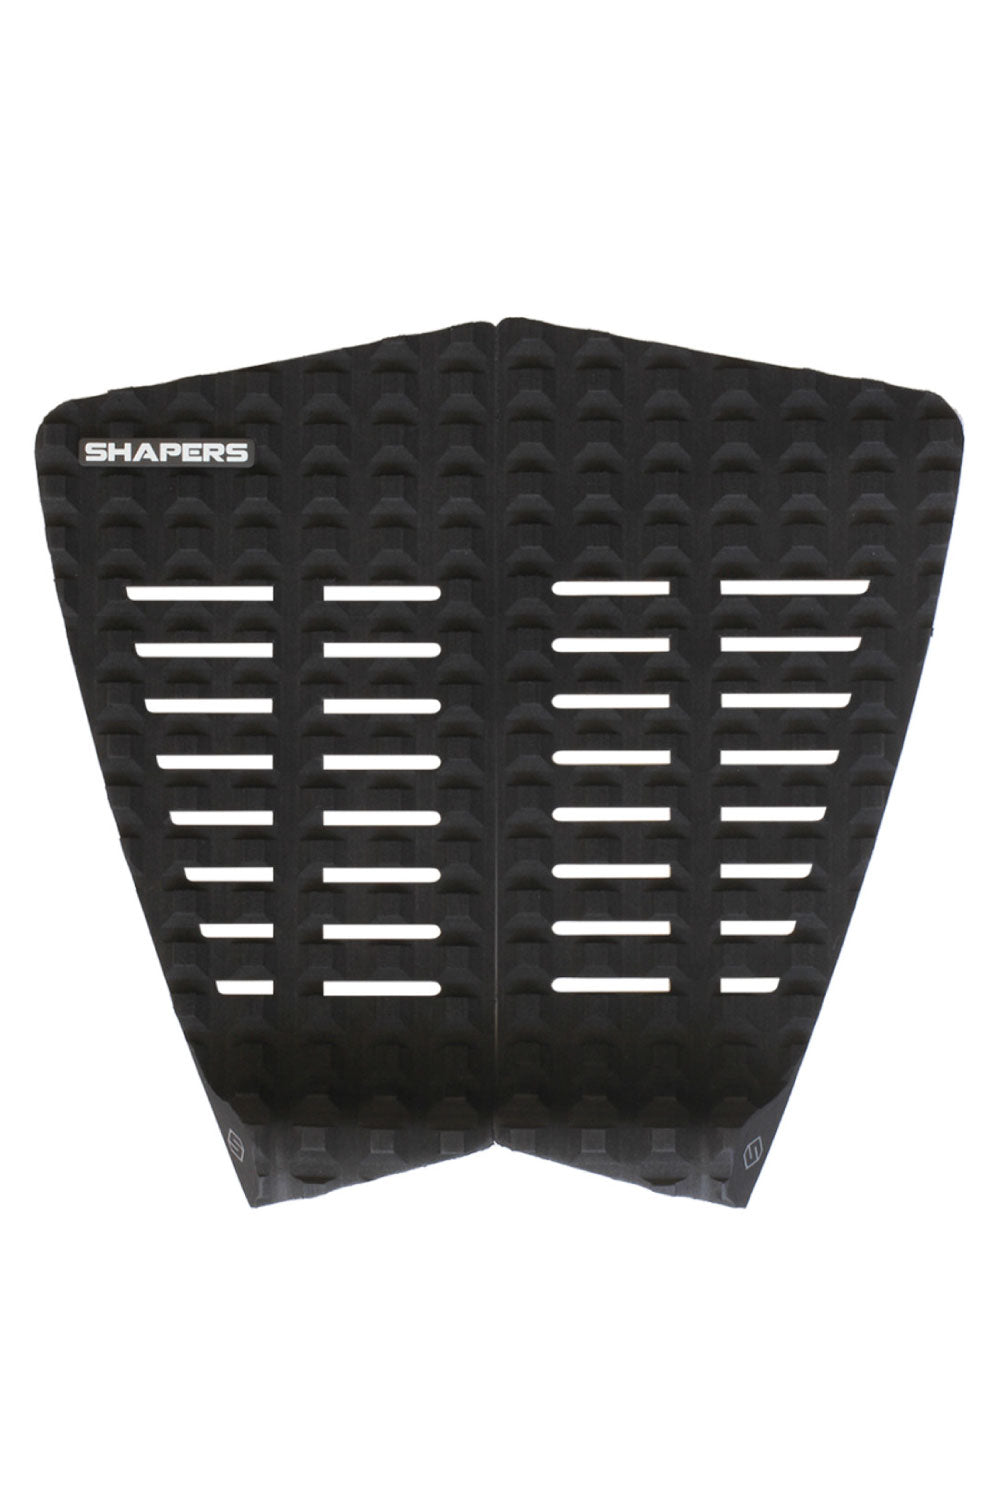 Shapers Eco Pad Asher Pacey Twin 2 Piece Grip Pad